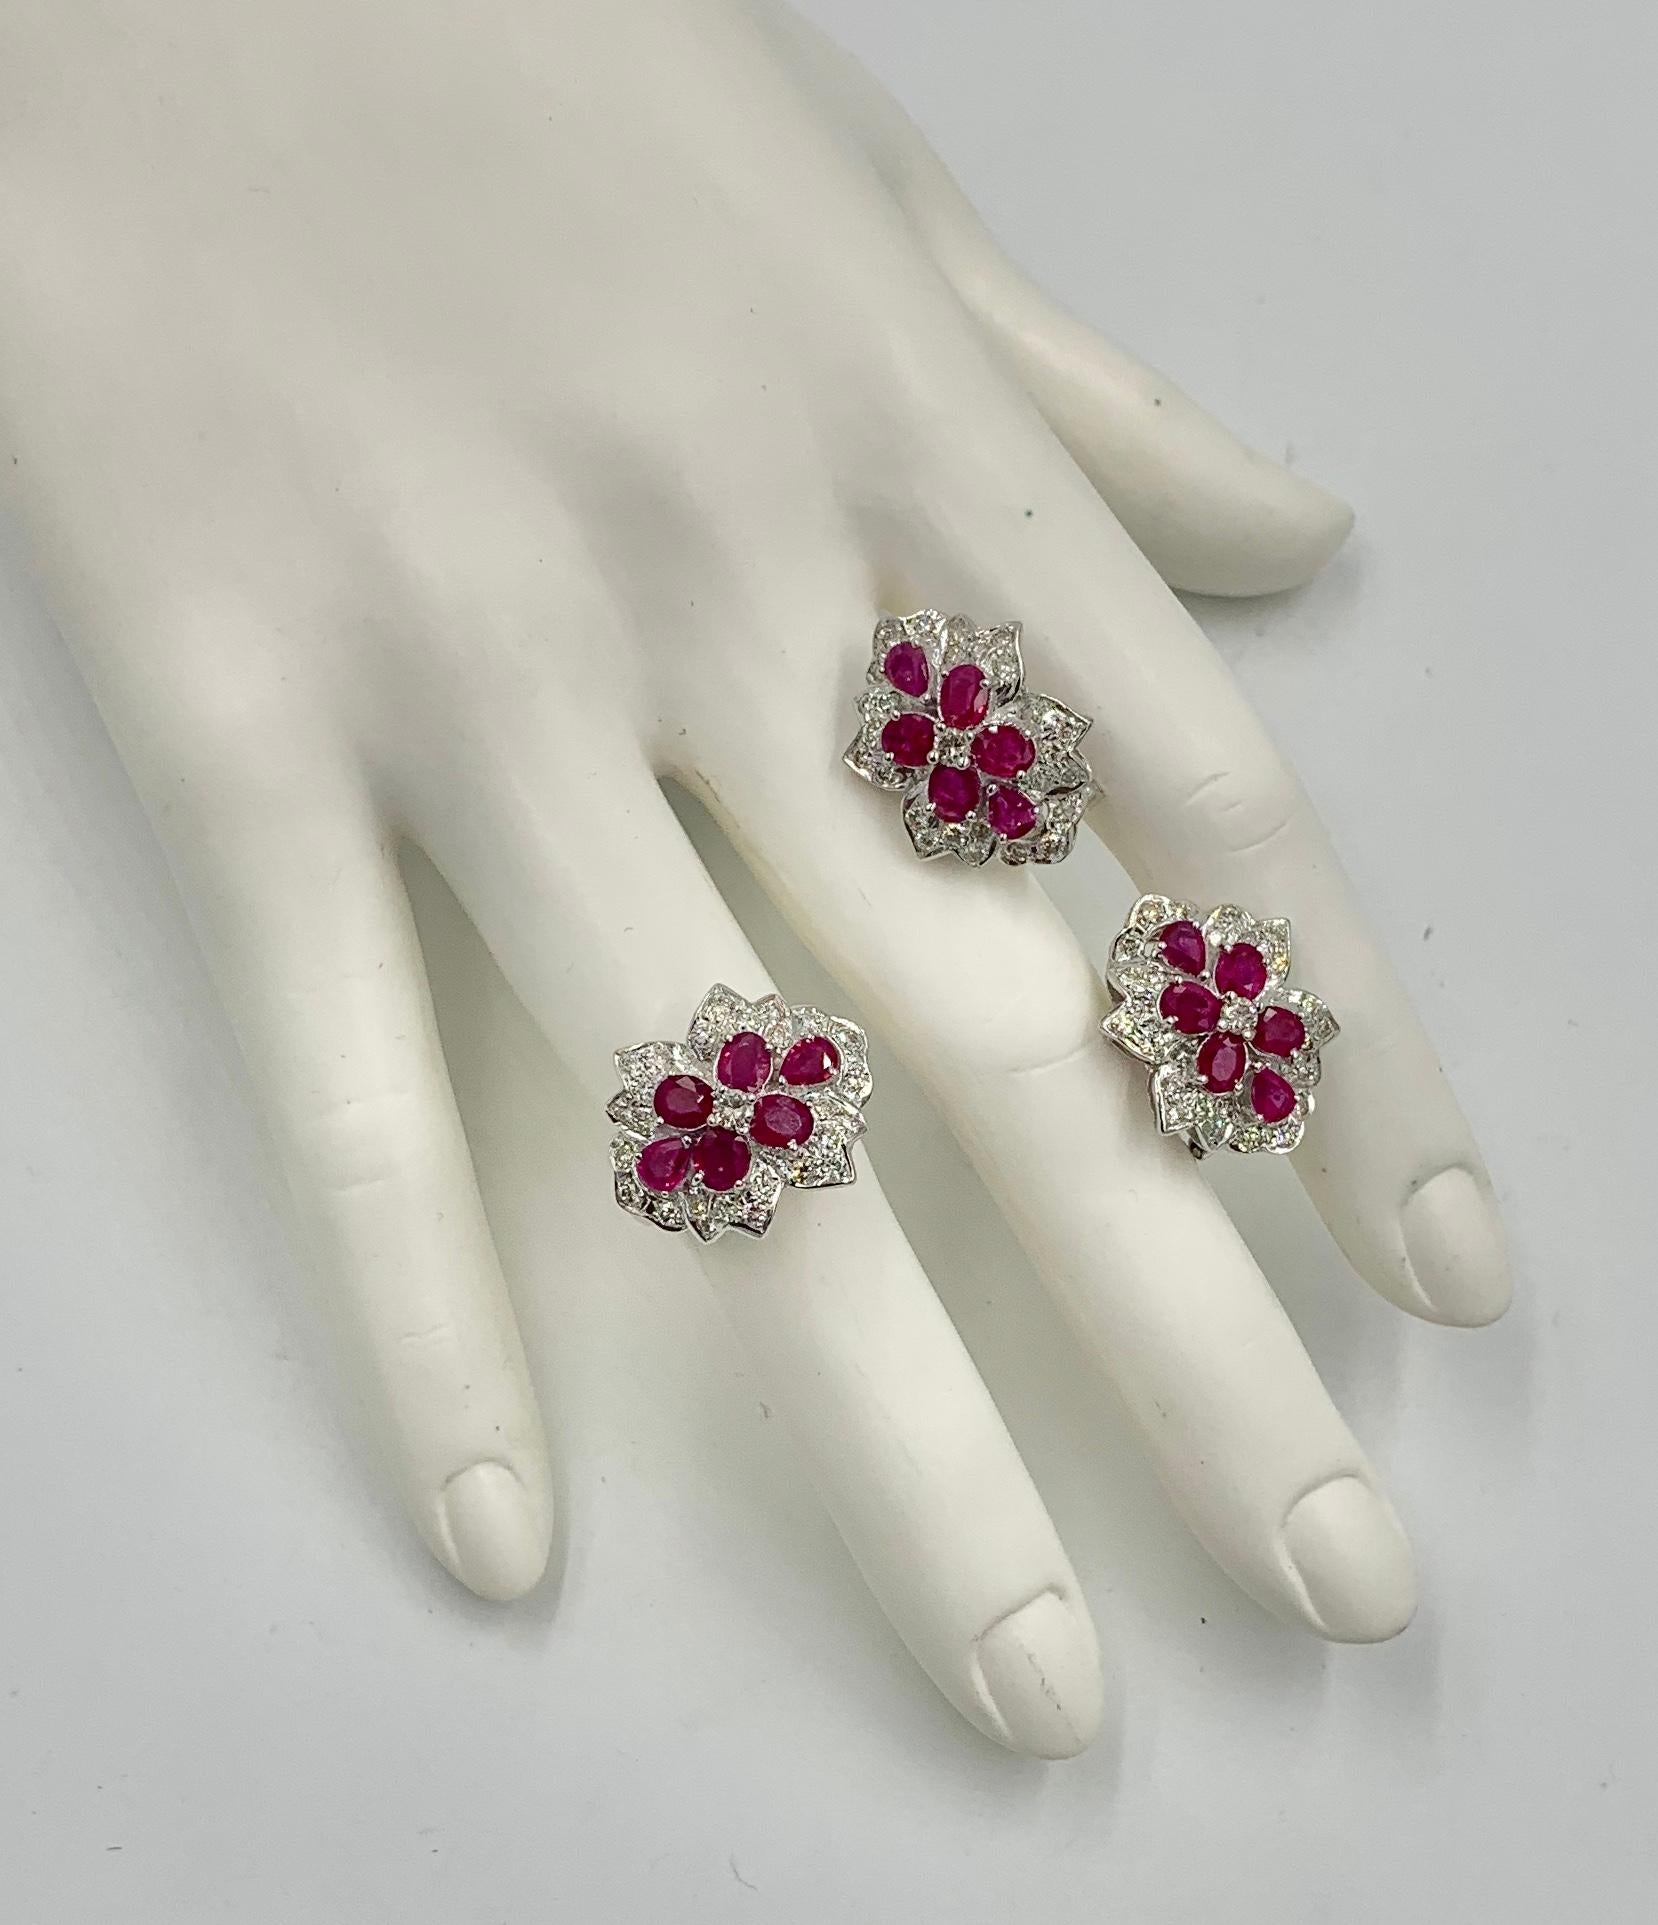 This is a magnificent matching set of fine red Ruby and Diamond Earrings and Ring in 18 Karat White Gold.   The absolutely stunning earrings and ring feature the most gorgeous bright Raspberry Red Rubies. There are 12 Oval Faceted Rubies and 6 Pear